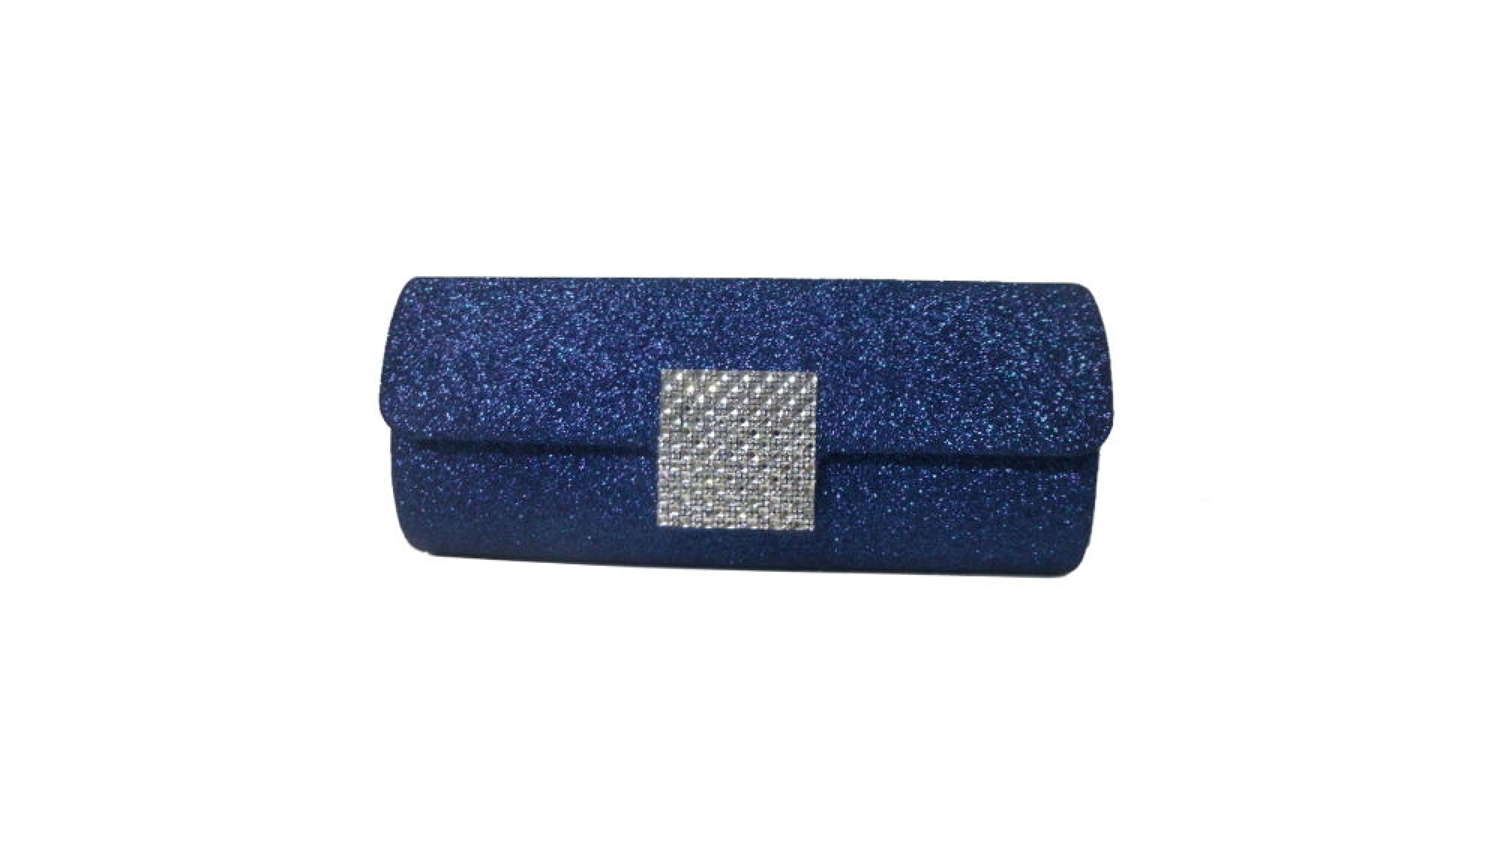 Glittery navy evening bag with diamante detail.